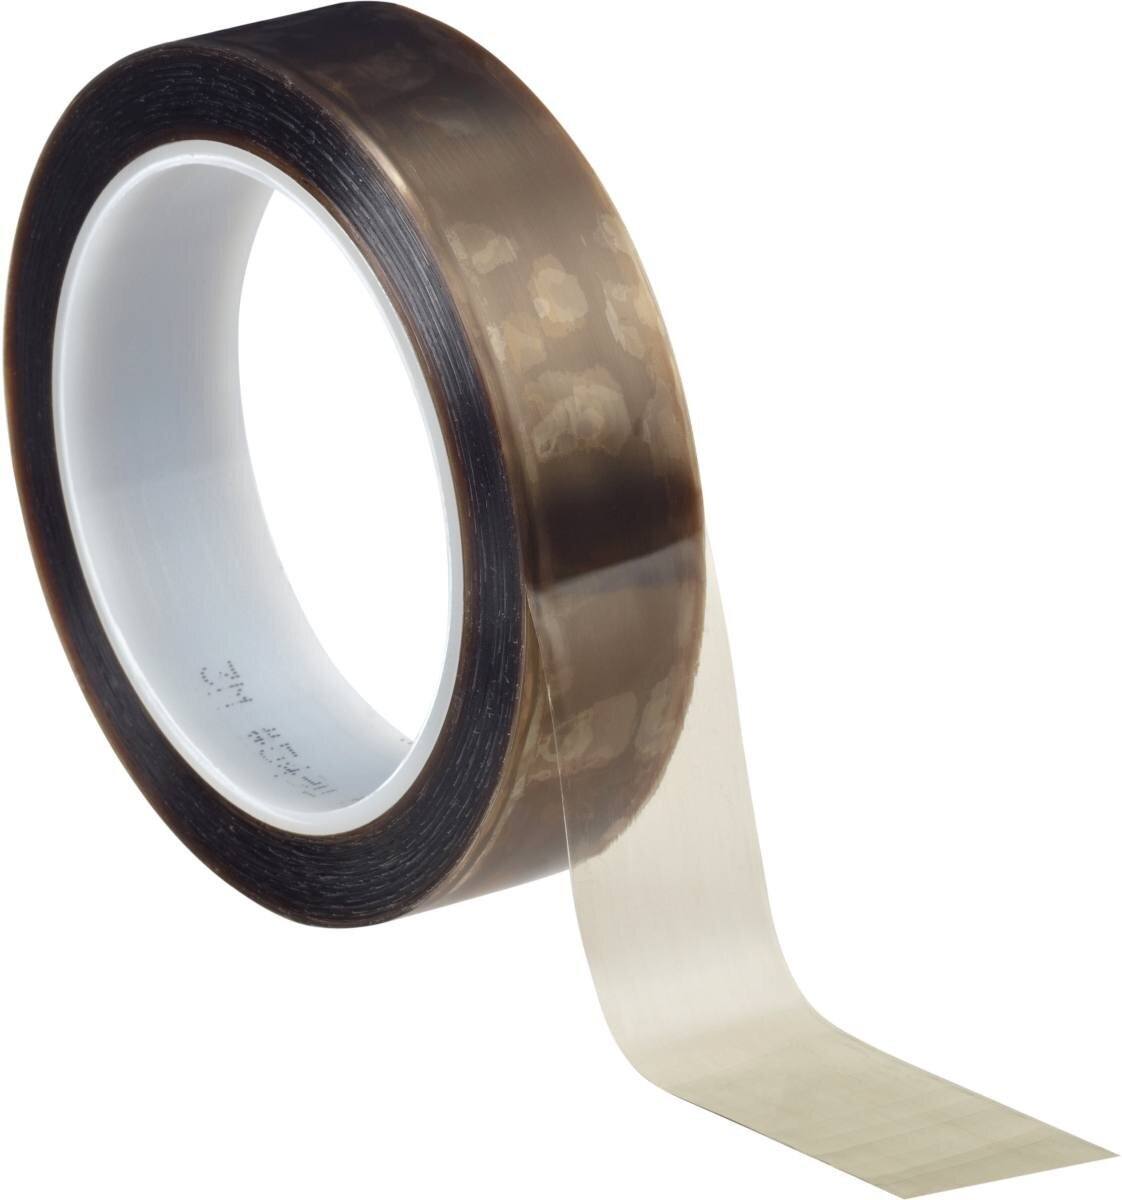 3M 5490 PTFE extruded film adhesive tape 101.6mmx33m, 0.09mm, silicone